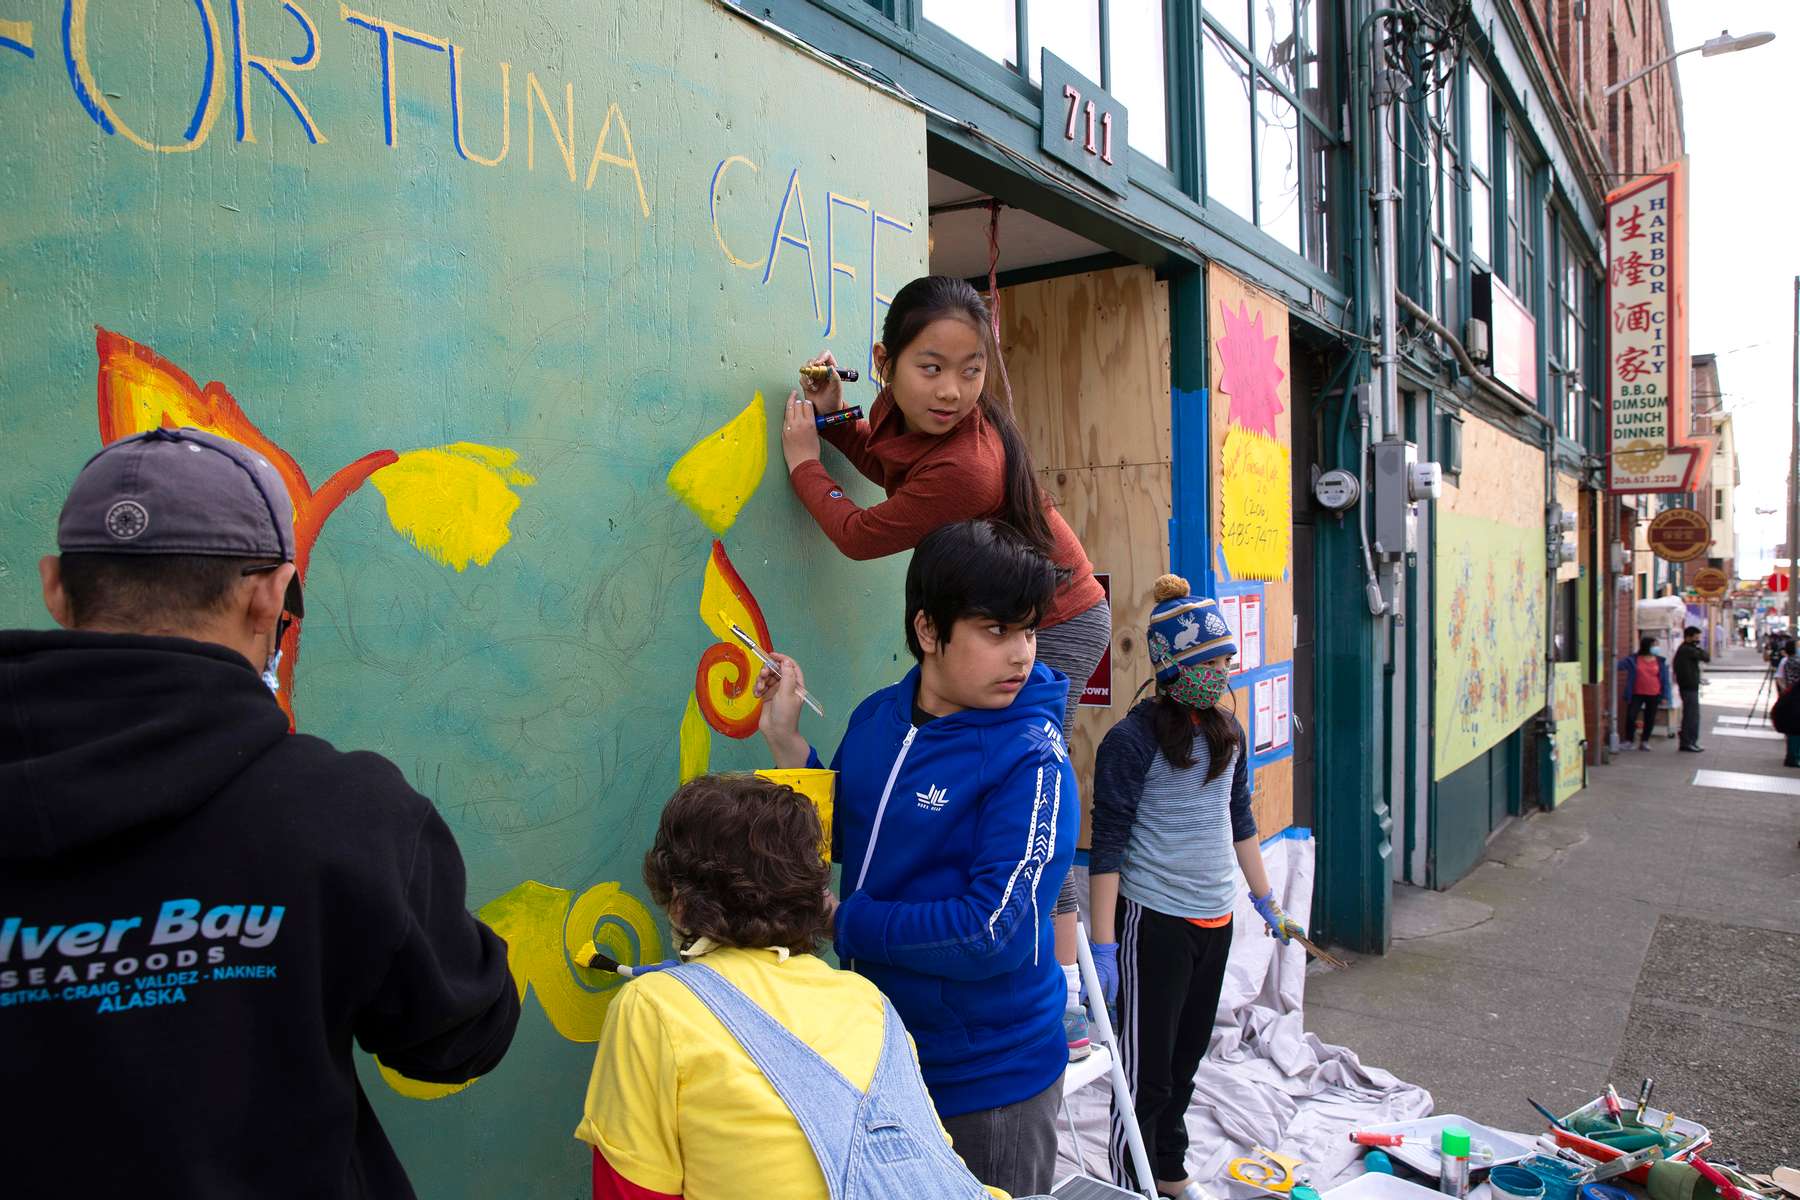 5th graders from Mr. Daichi Hirataís class at the Waldorf School, including Kabir Sethi (center), 11, and Mika Kodama- Chew (on ladder) paint a mural of a Chinese lion over the boarded up storefront of the Fortuna Cafe in Seattle, WA on June 9, 2020. Many storefronts were damaged after a night of rioting swept through the CID after the death of George Floyd, a black man who died when a police officer pinned him to the ground with a knee on his neck. The community responded by boarding up storefronts and hosting artist events to brighten up the streets with murals painted on them. The kids were distracted by firemen putting out a fire at the building across the street. (photo by Karen Ducey)